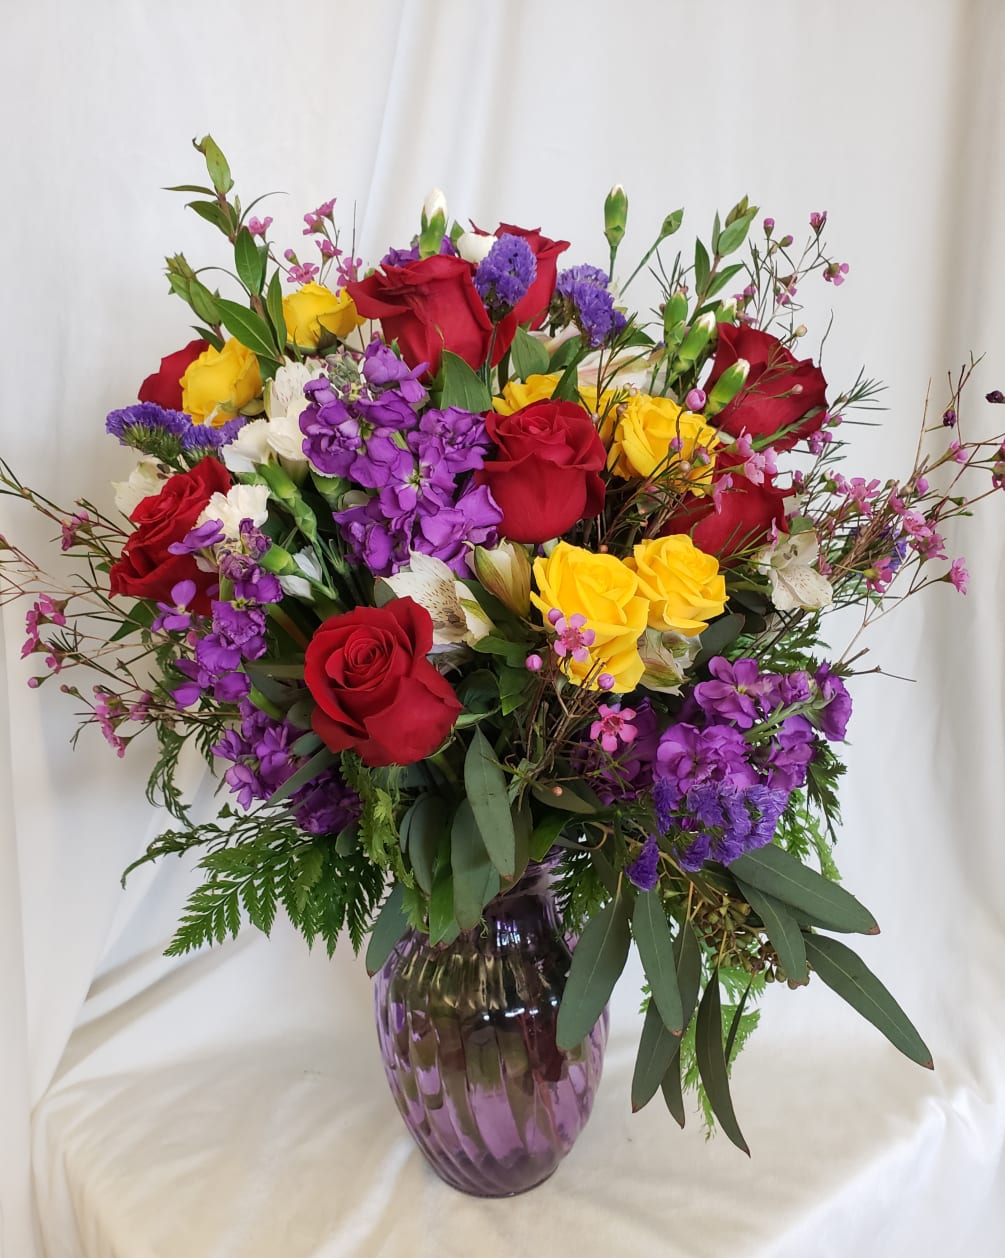 Bright and cheery arrangement of yellow spray roses, red roses, purple stock